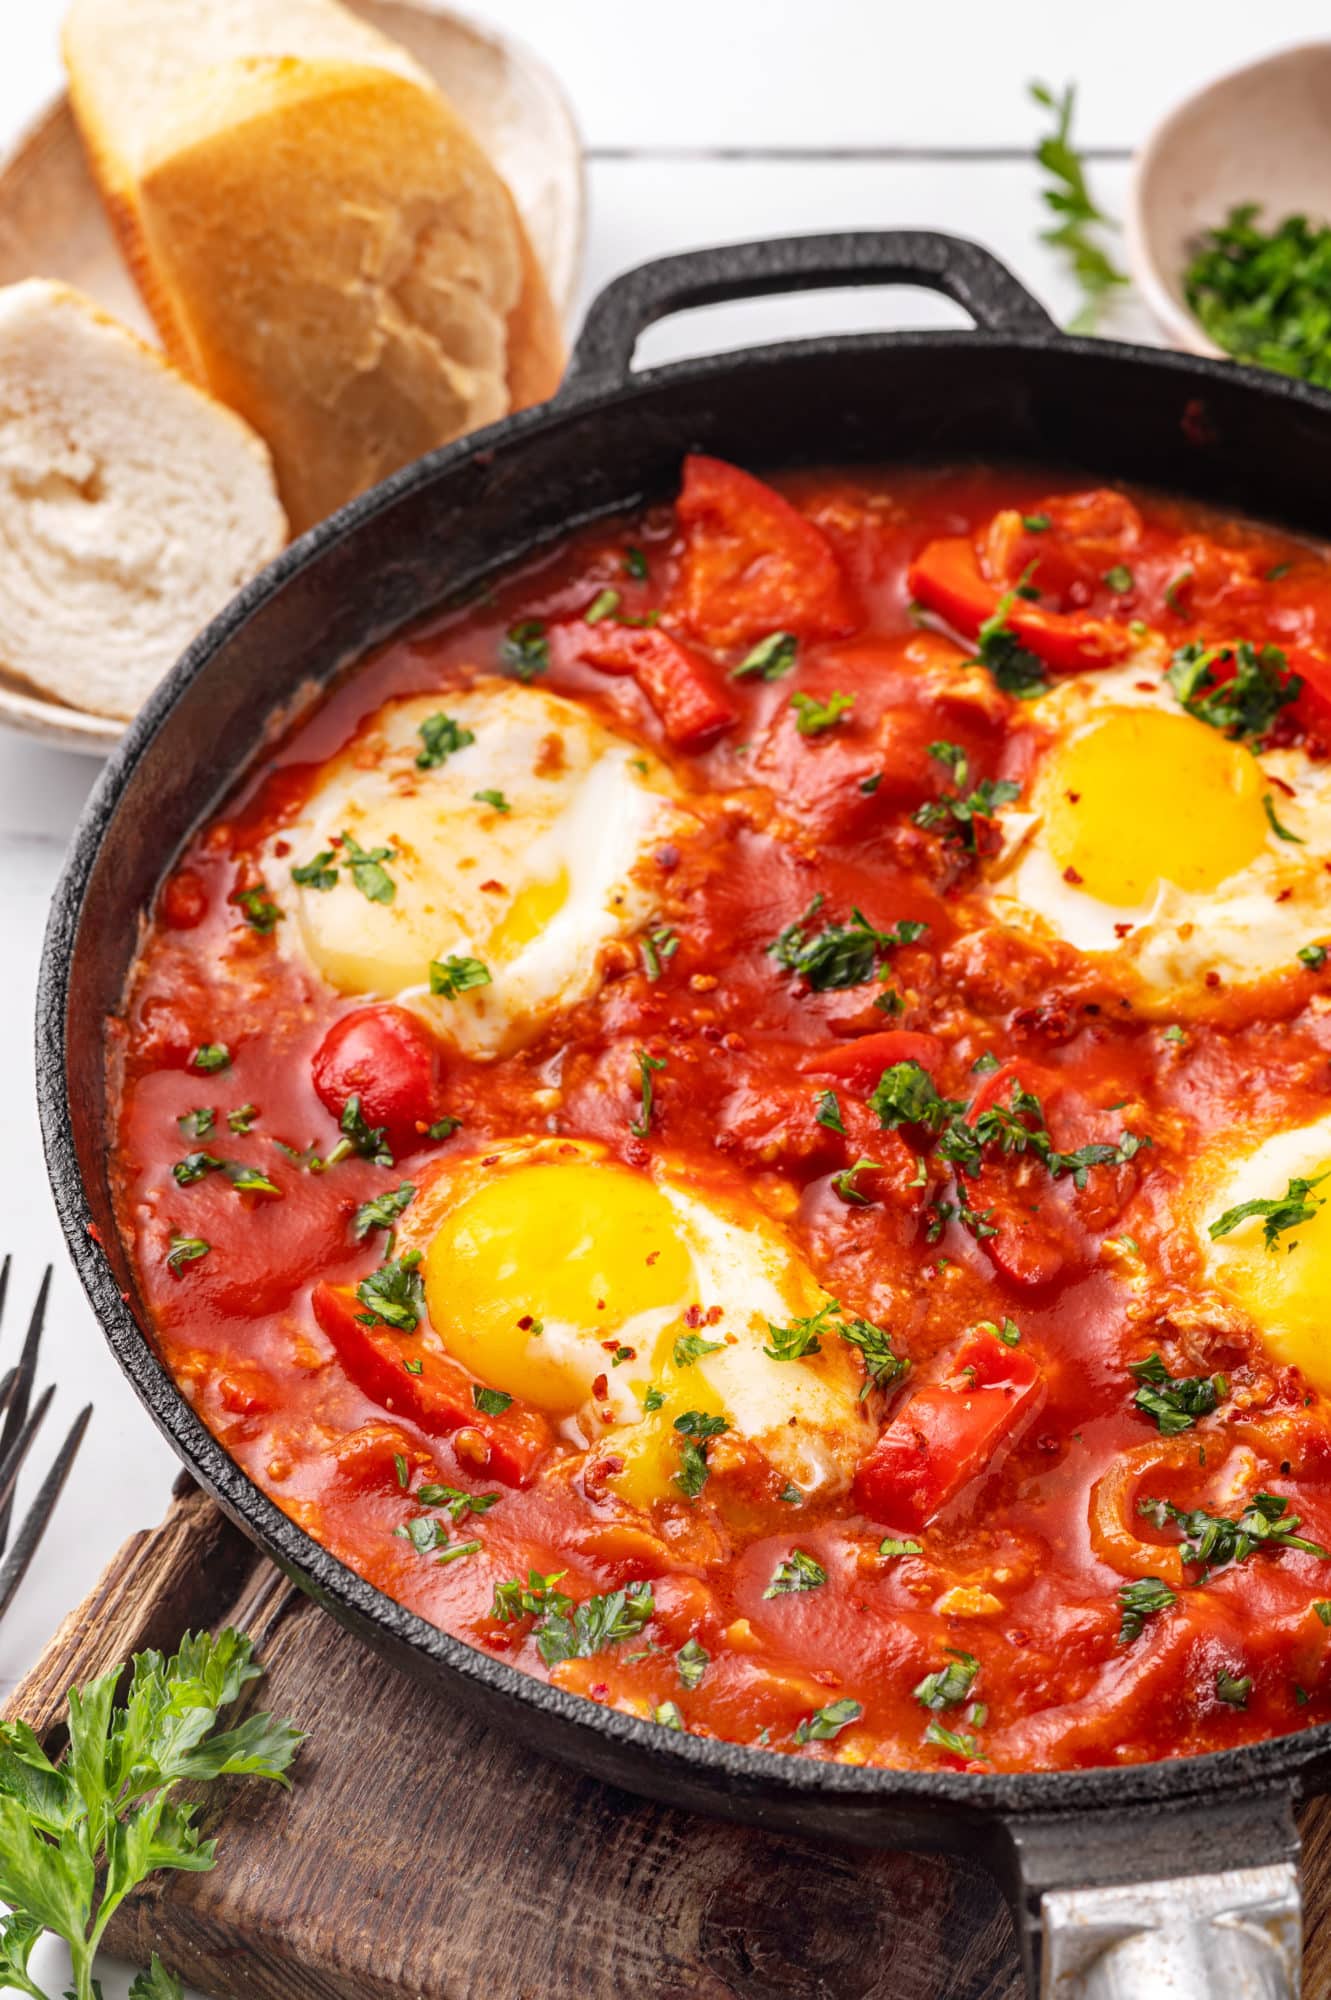 shakshuka-in-a-skillet-on-a-wooden-board-with-bread-on-the-side